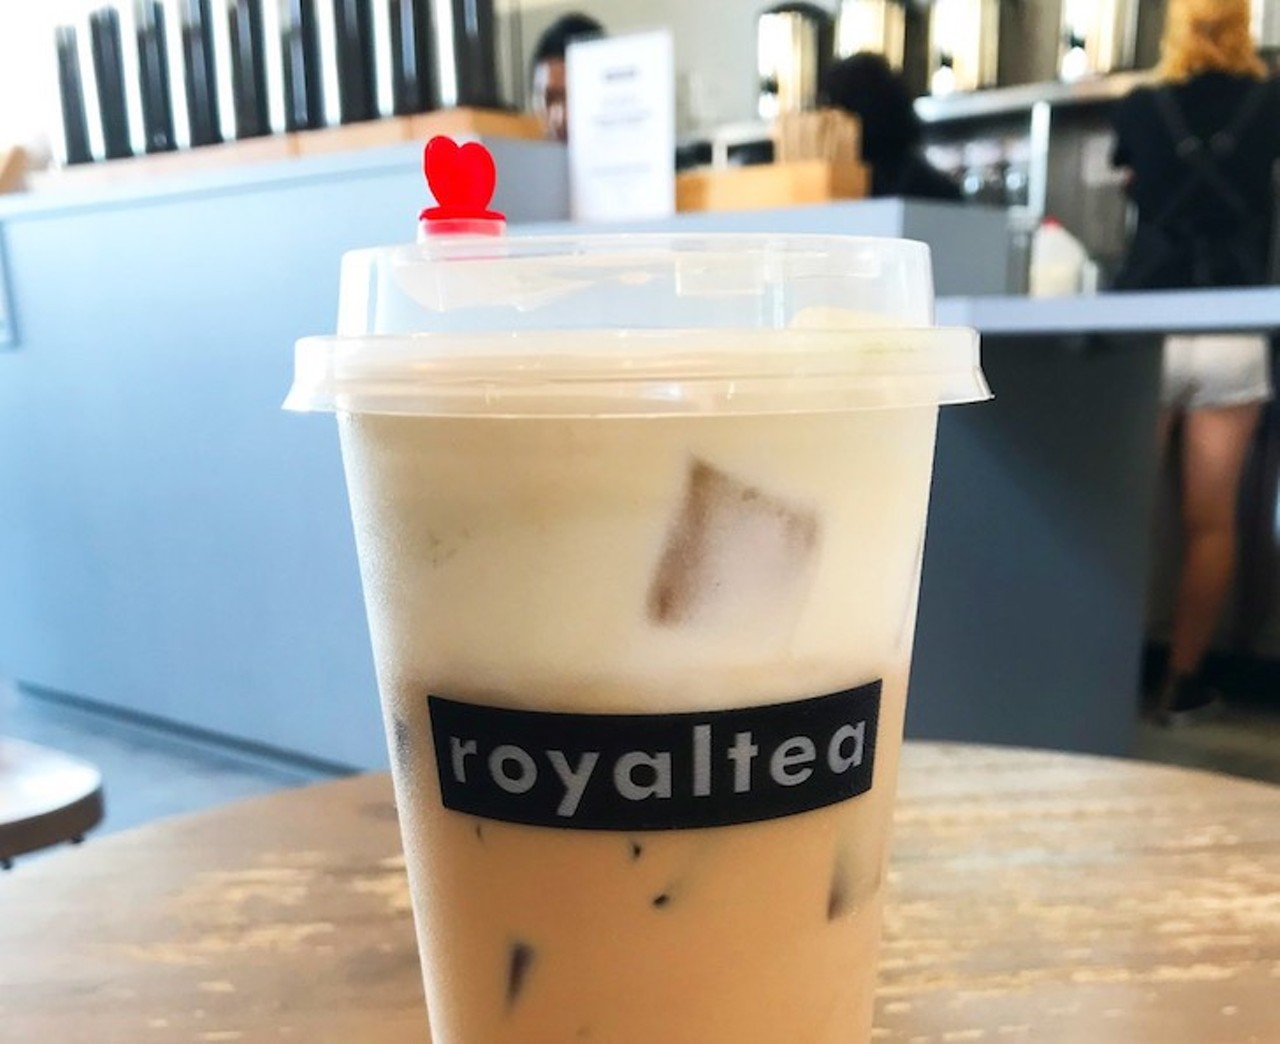 Best Cheesy Beverage (Staff Pick)
Royal Tea's cheese tea
714 N. Mills Ave., facebook.com/royalteaorlando
It's a beverage worthy of delectation by Wallace & Gromit, and we can't seem to get enough of it ourselves. It's cheeeeeeese tea, a combination of cold black (or green) tea topped with a moussey foam fashioned from milk, cream cheese and whipping cream. Tilt the cup back 45 degrees to enjoy it in all its sweet, salty and utterly luscious glory. Oh, and enjoy flaunting your new #MousseStache.
Photo by Melissa McHenry